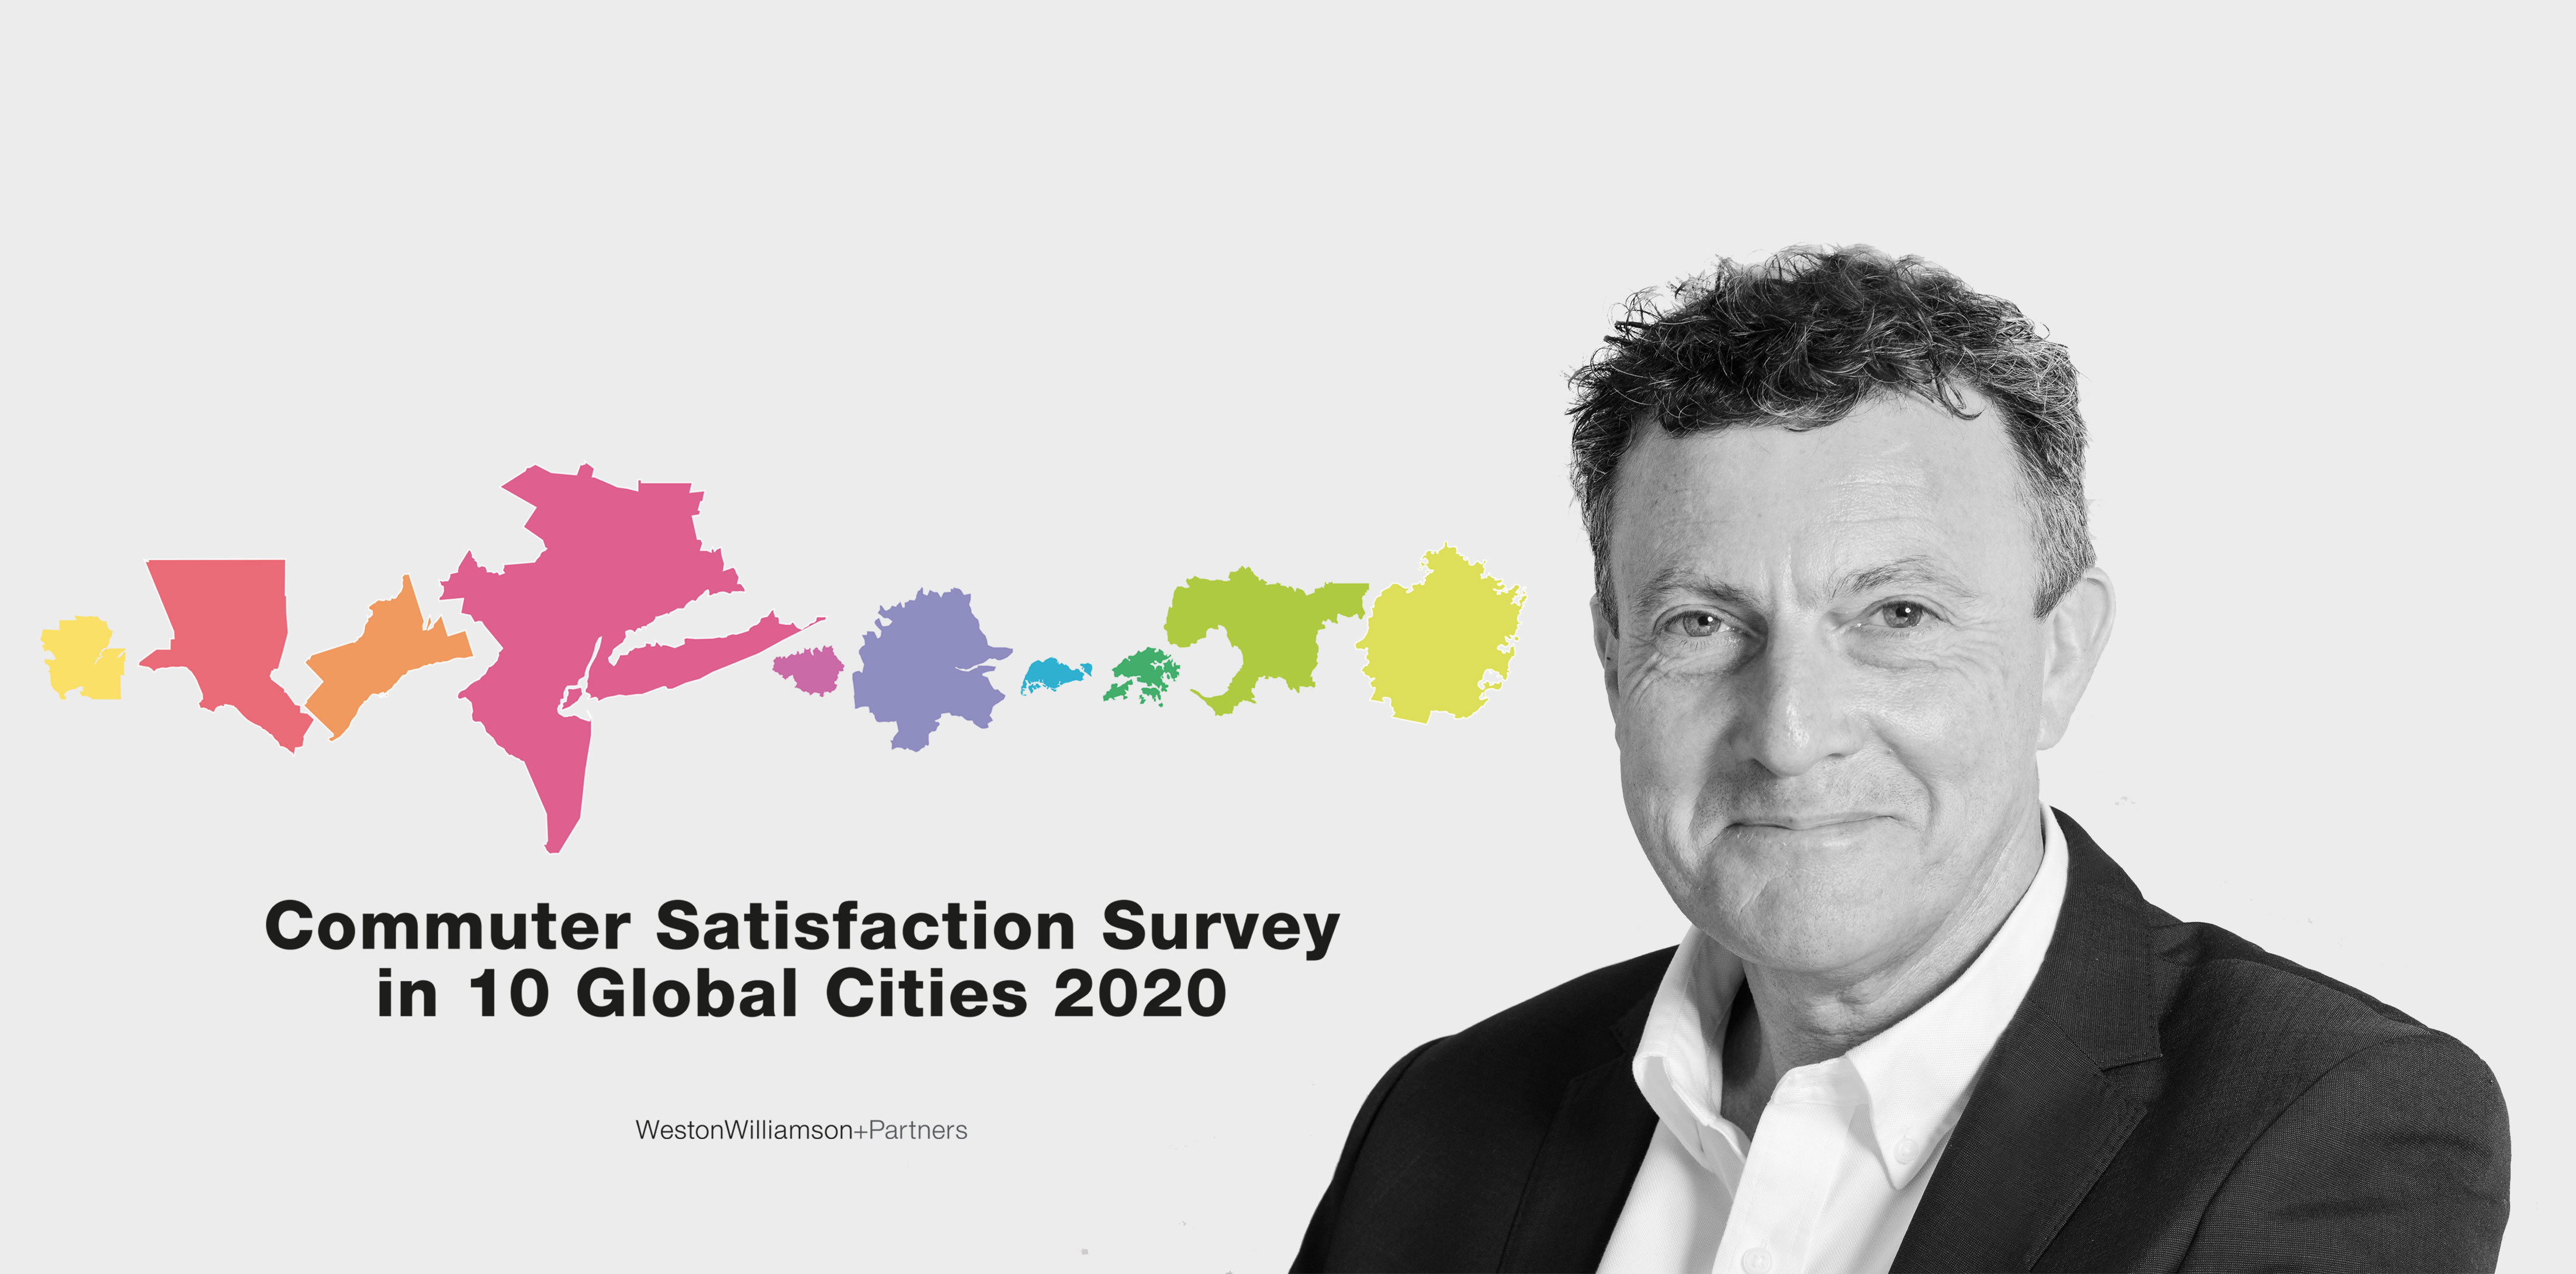 Commuter-Satisfaction-Survey-in-10-Global-Cities-2020-podcast.jpg#asset:11473